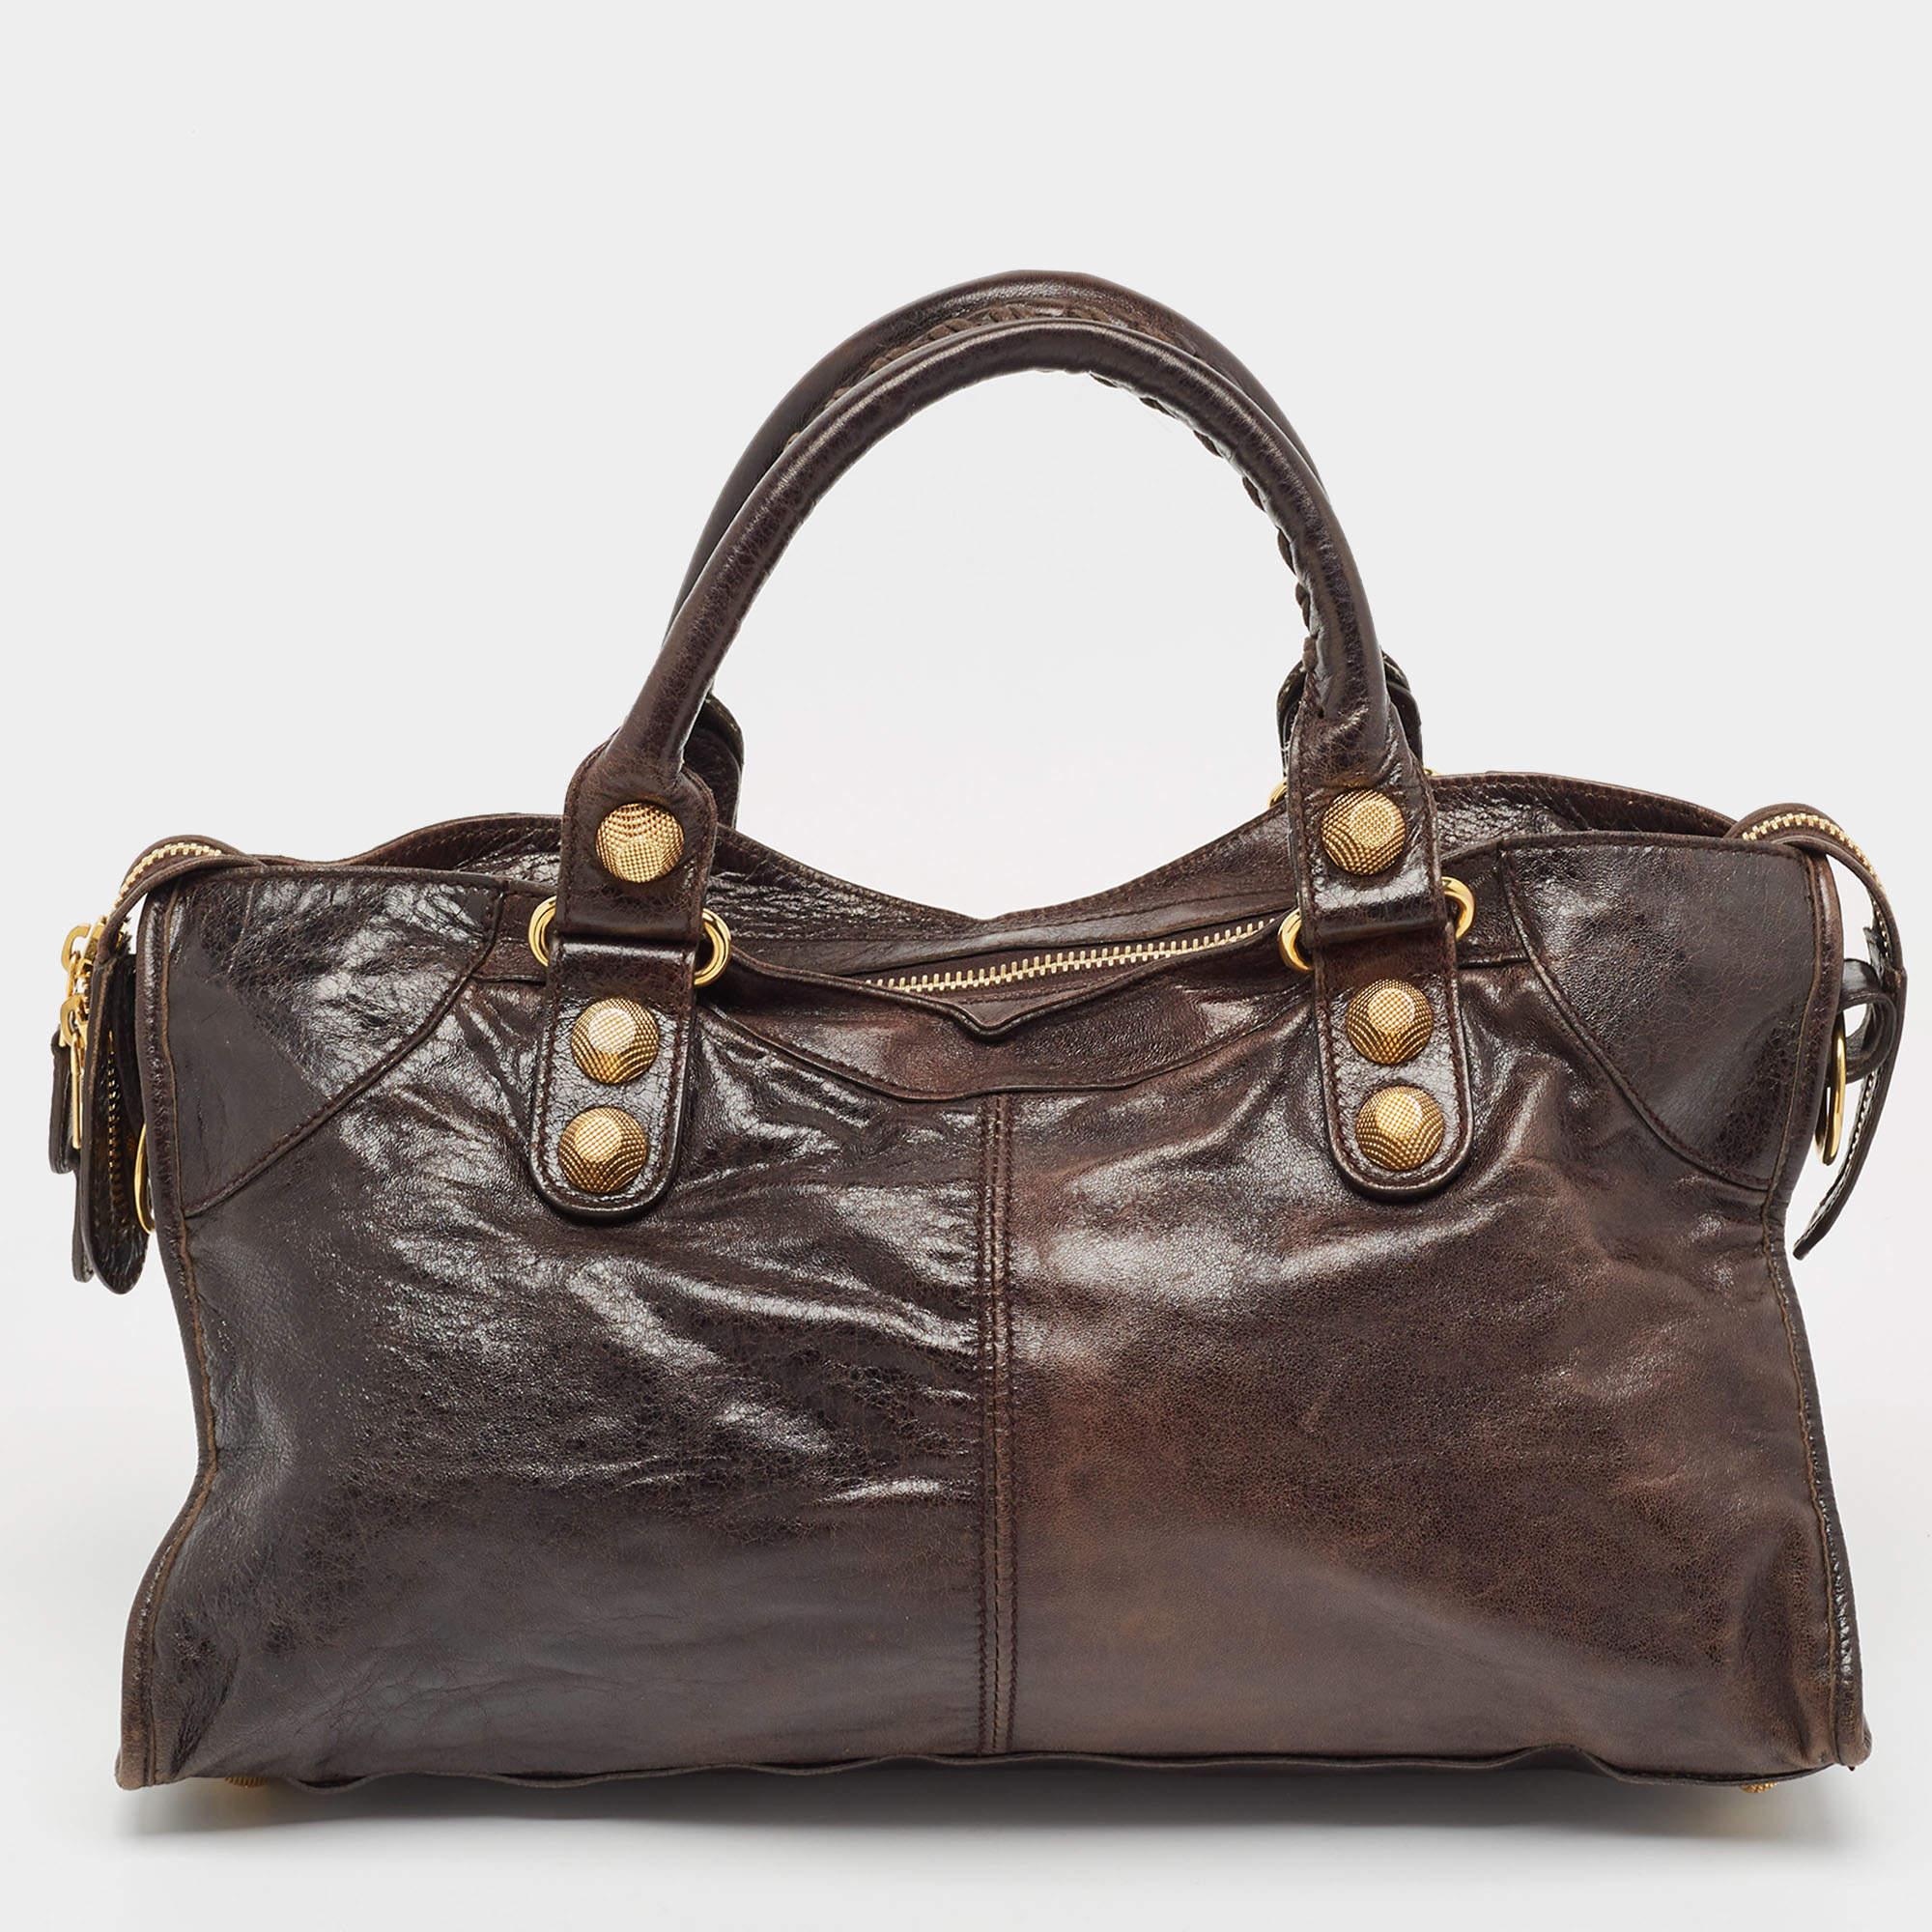 Displaying exquisite craftsmanship, this fabulous bag will certainly live up to your expectations. Featuring a chic design, it is made from luxe materials and has a roomy interior for carrying your essentials.

Includes: Original Dustbag, Detachable